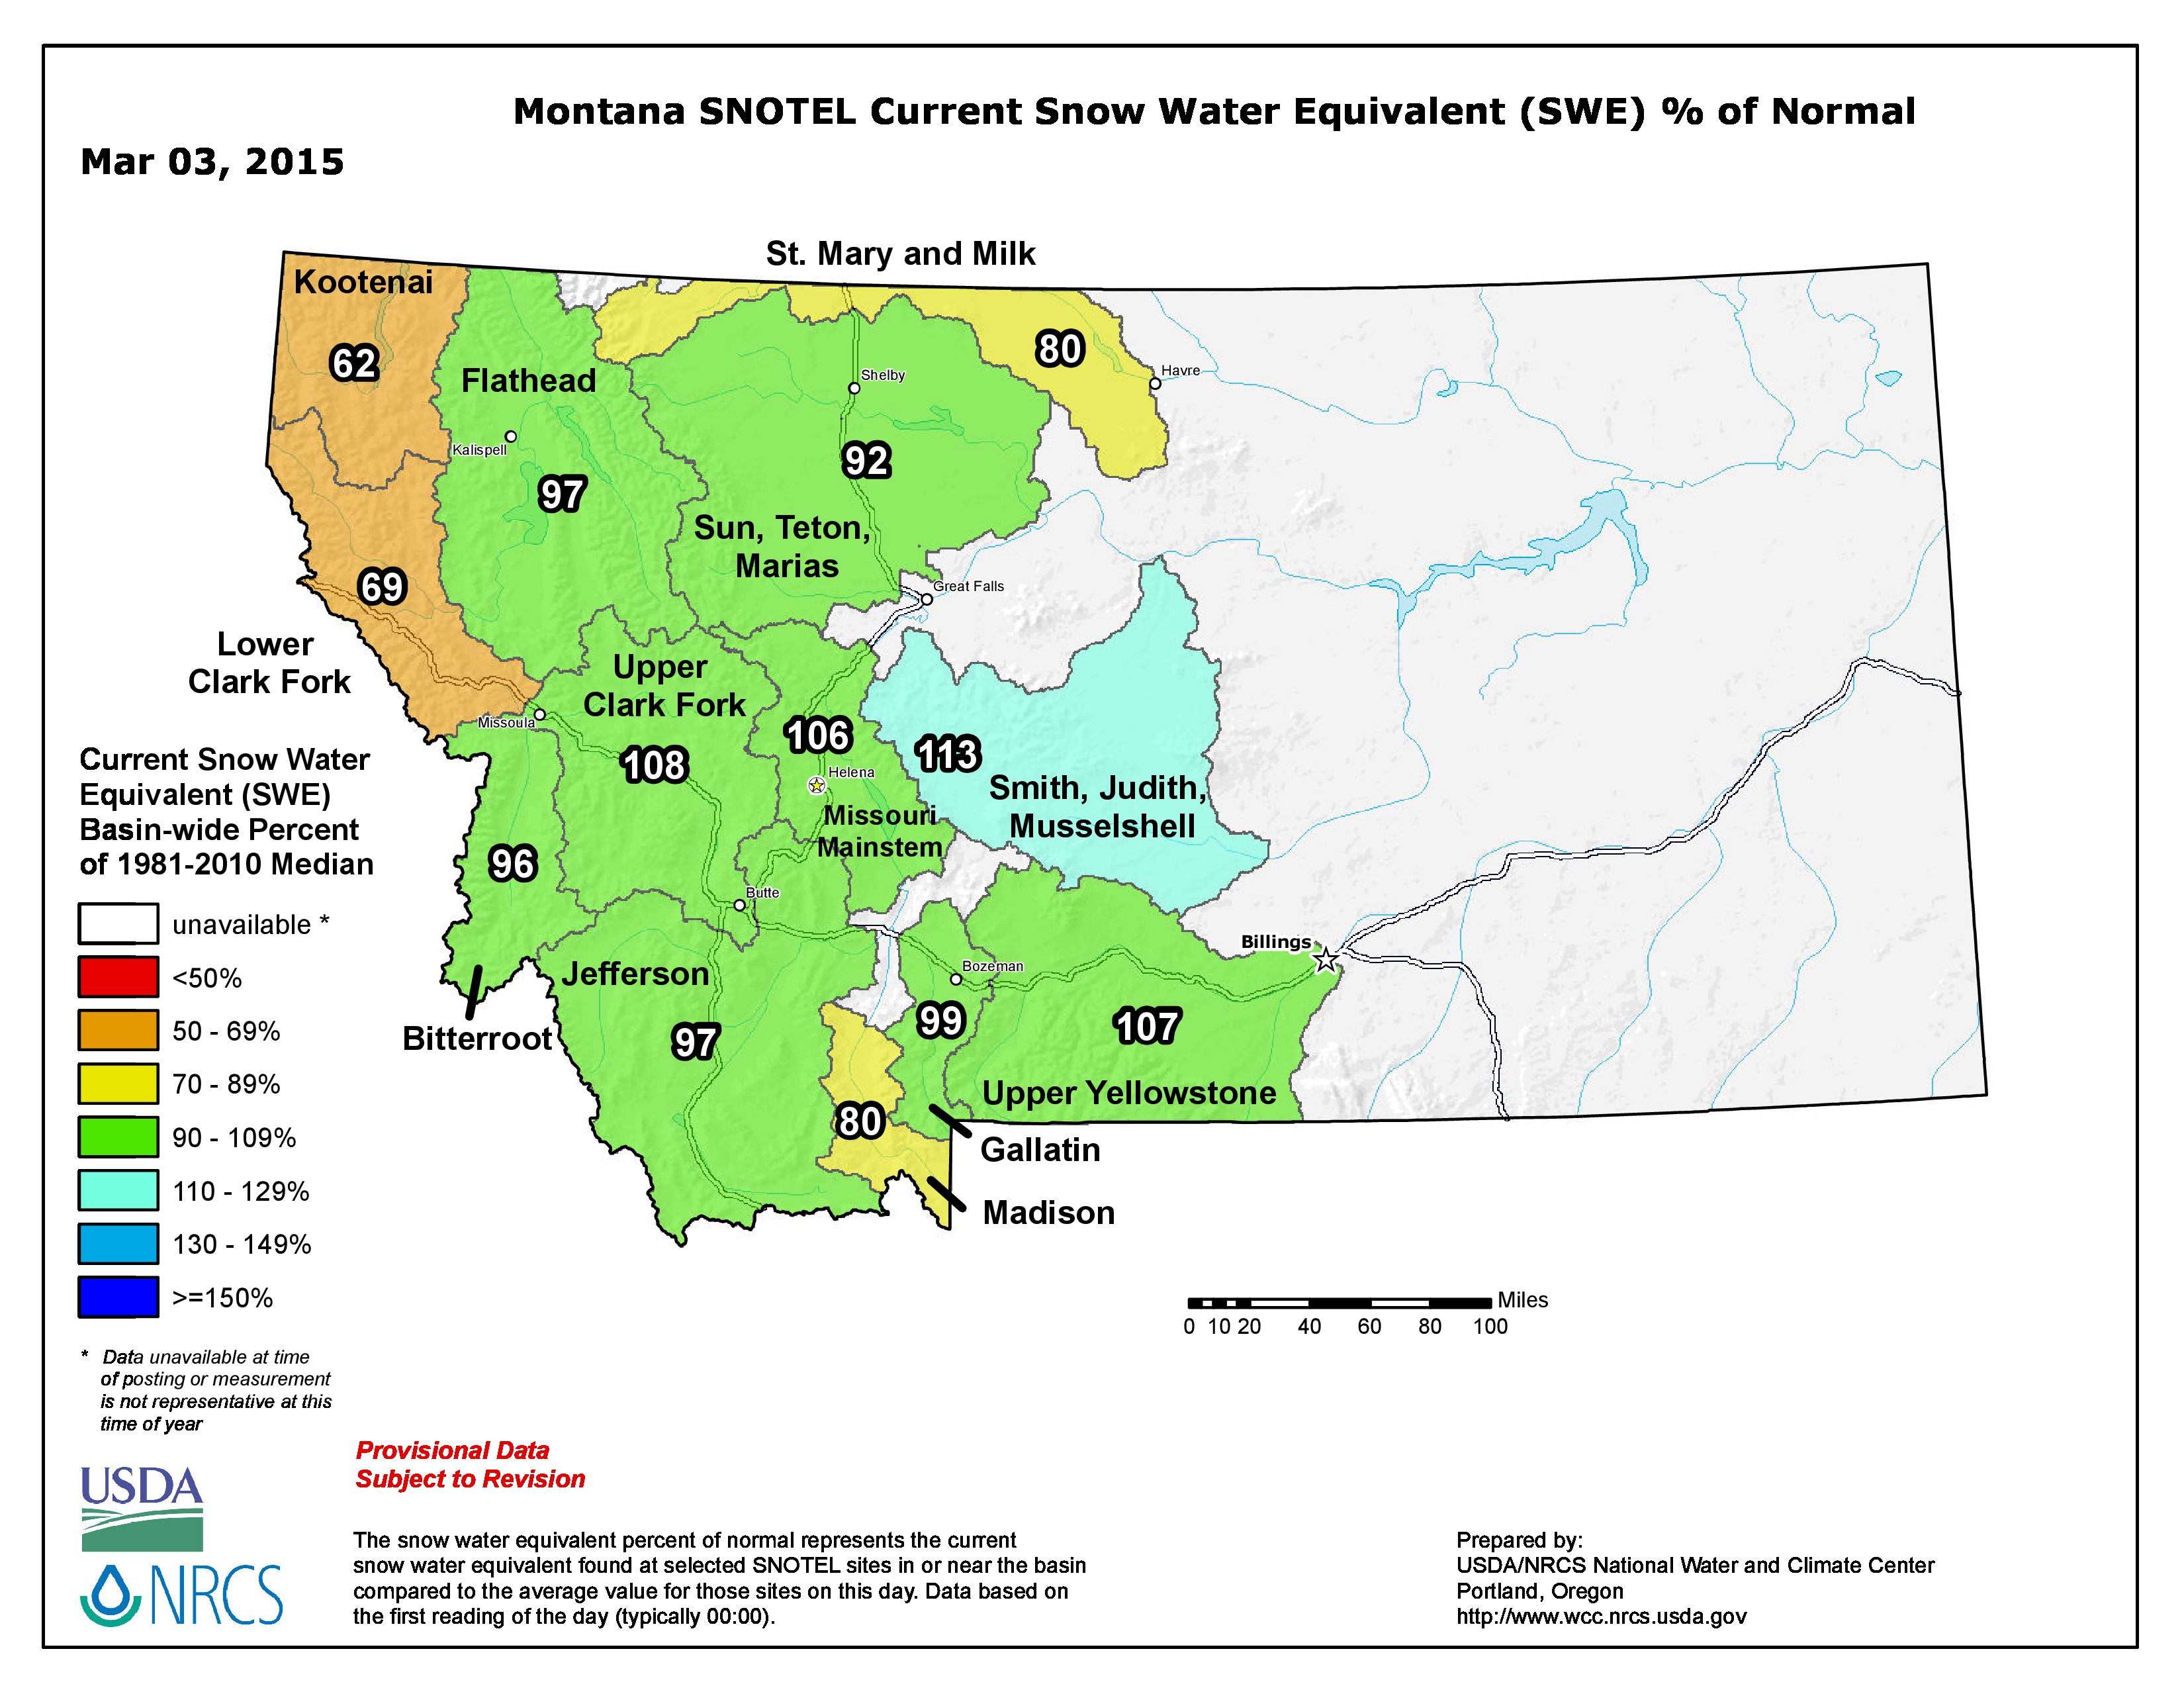 Map showing the percent of normal snow water equivalent for March 3rd. At 90-109%, the Gallatin is near normal.